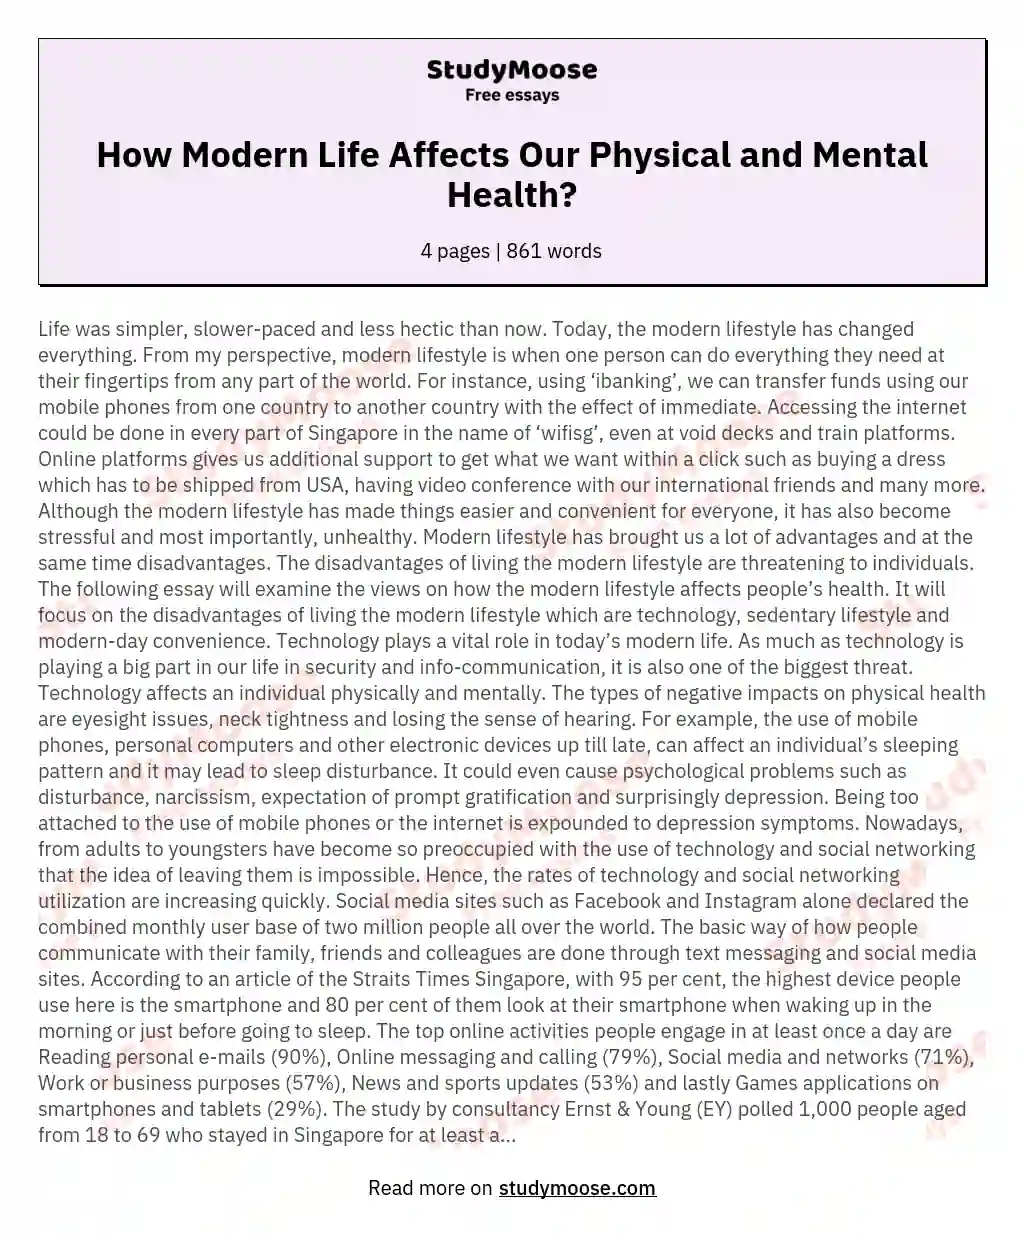 How Modern Life Affects Our Physical and Mental Health? essay